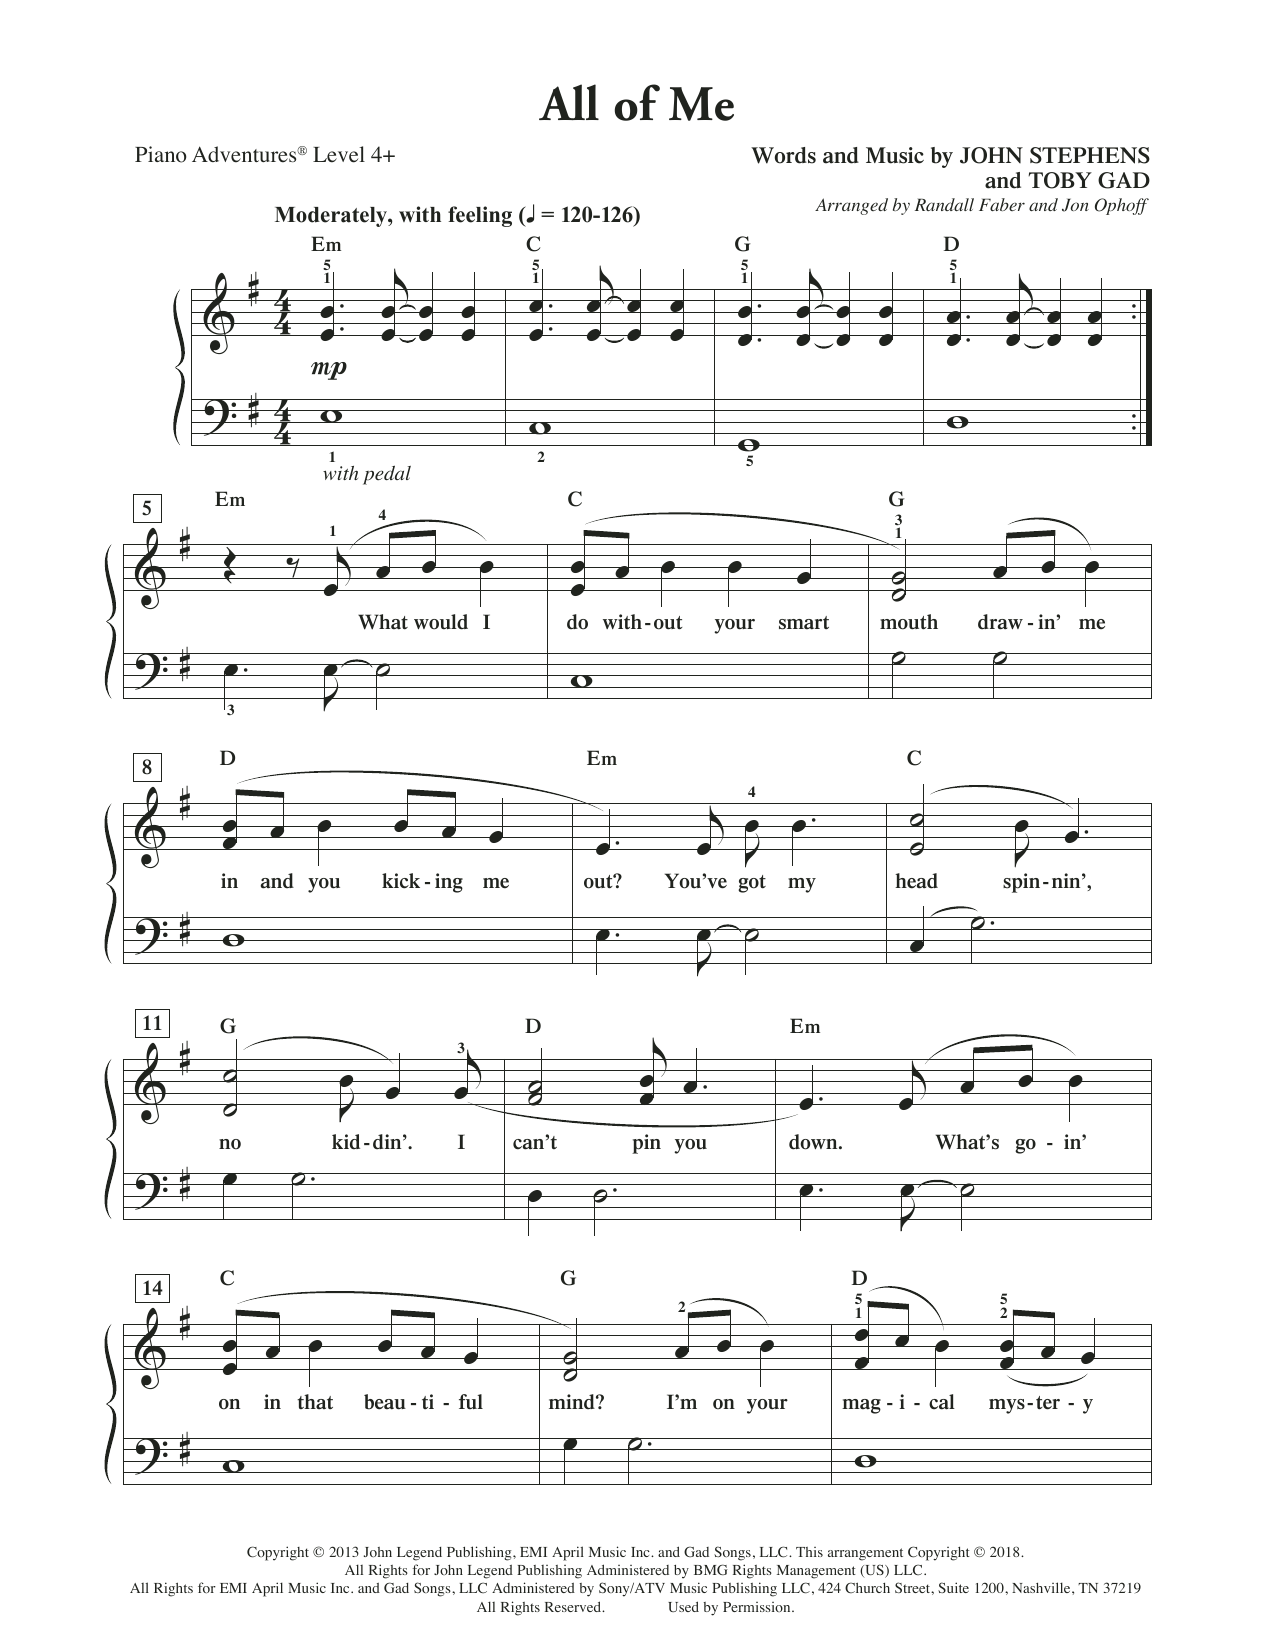 Download Randall Faber & Jon Ophoff All of Me Sheet Music